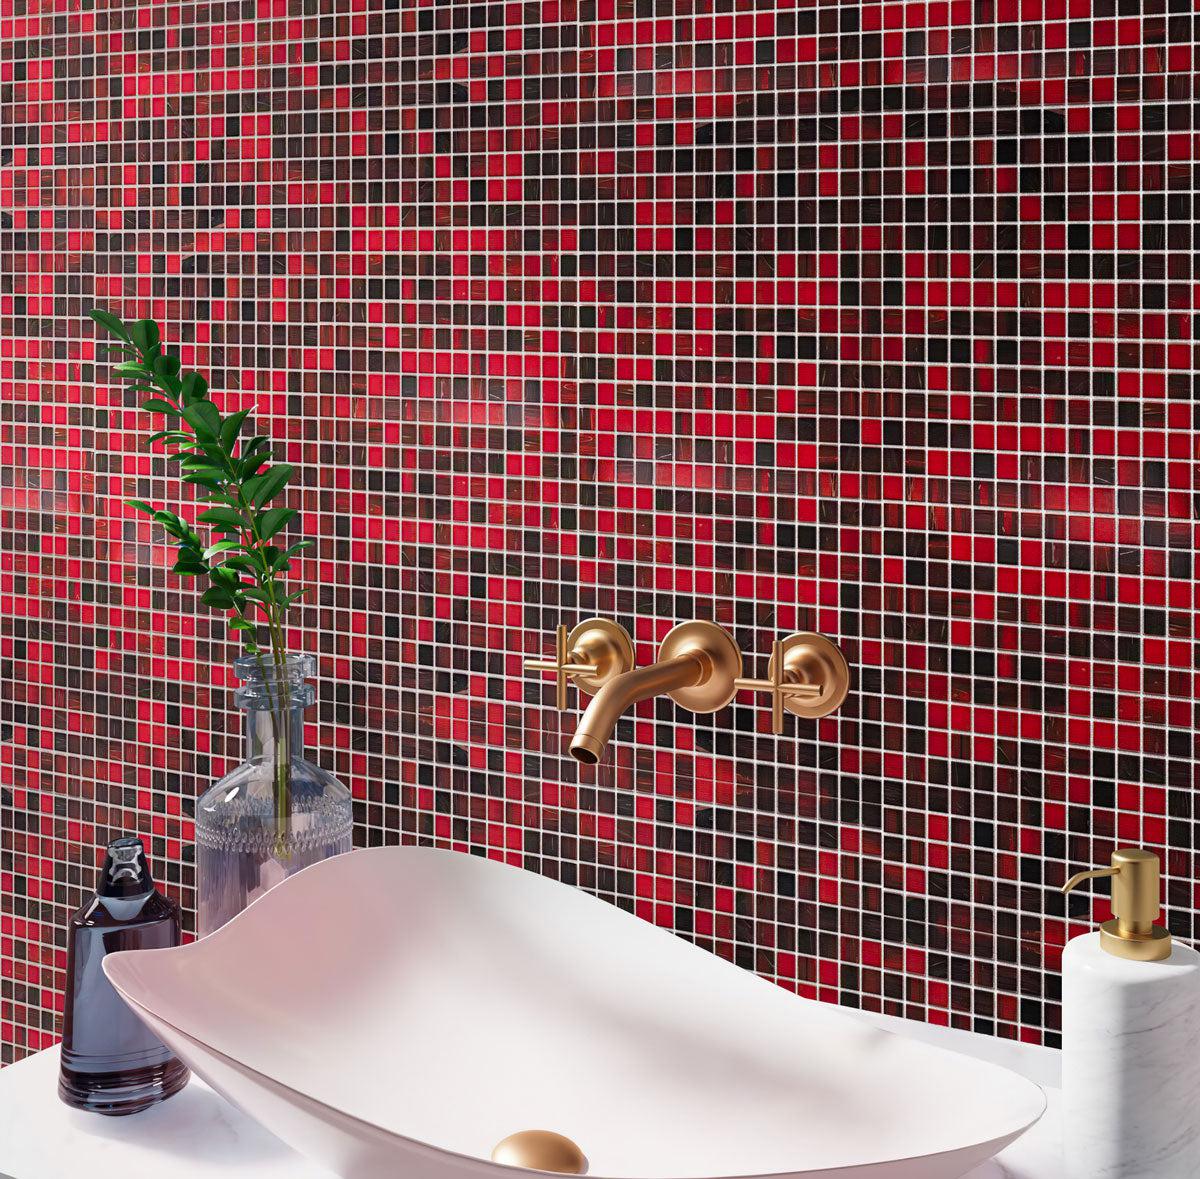 Queen of Hearts Red Mixed Squares Glass Tile adds drama to bathroom